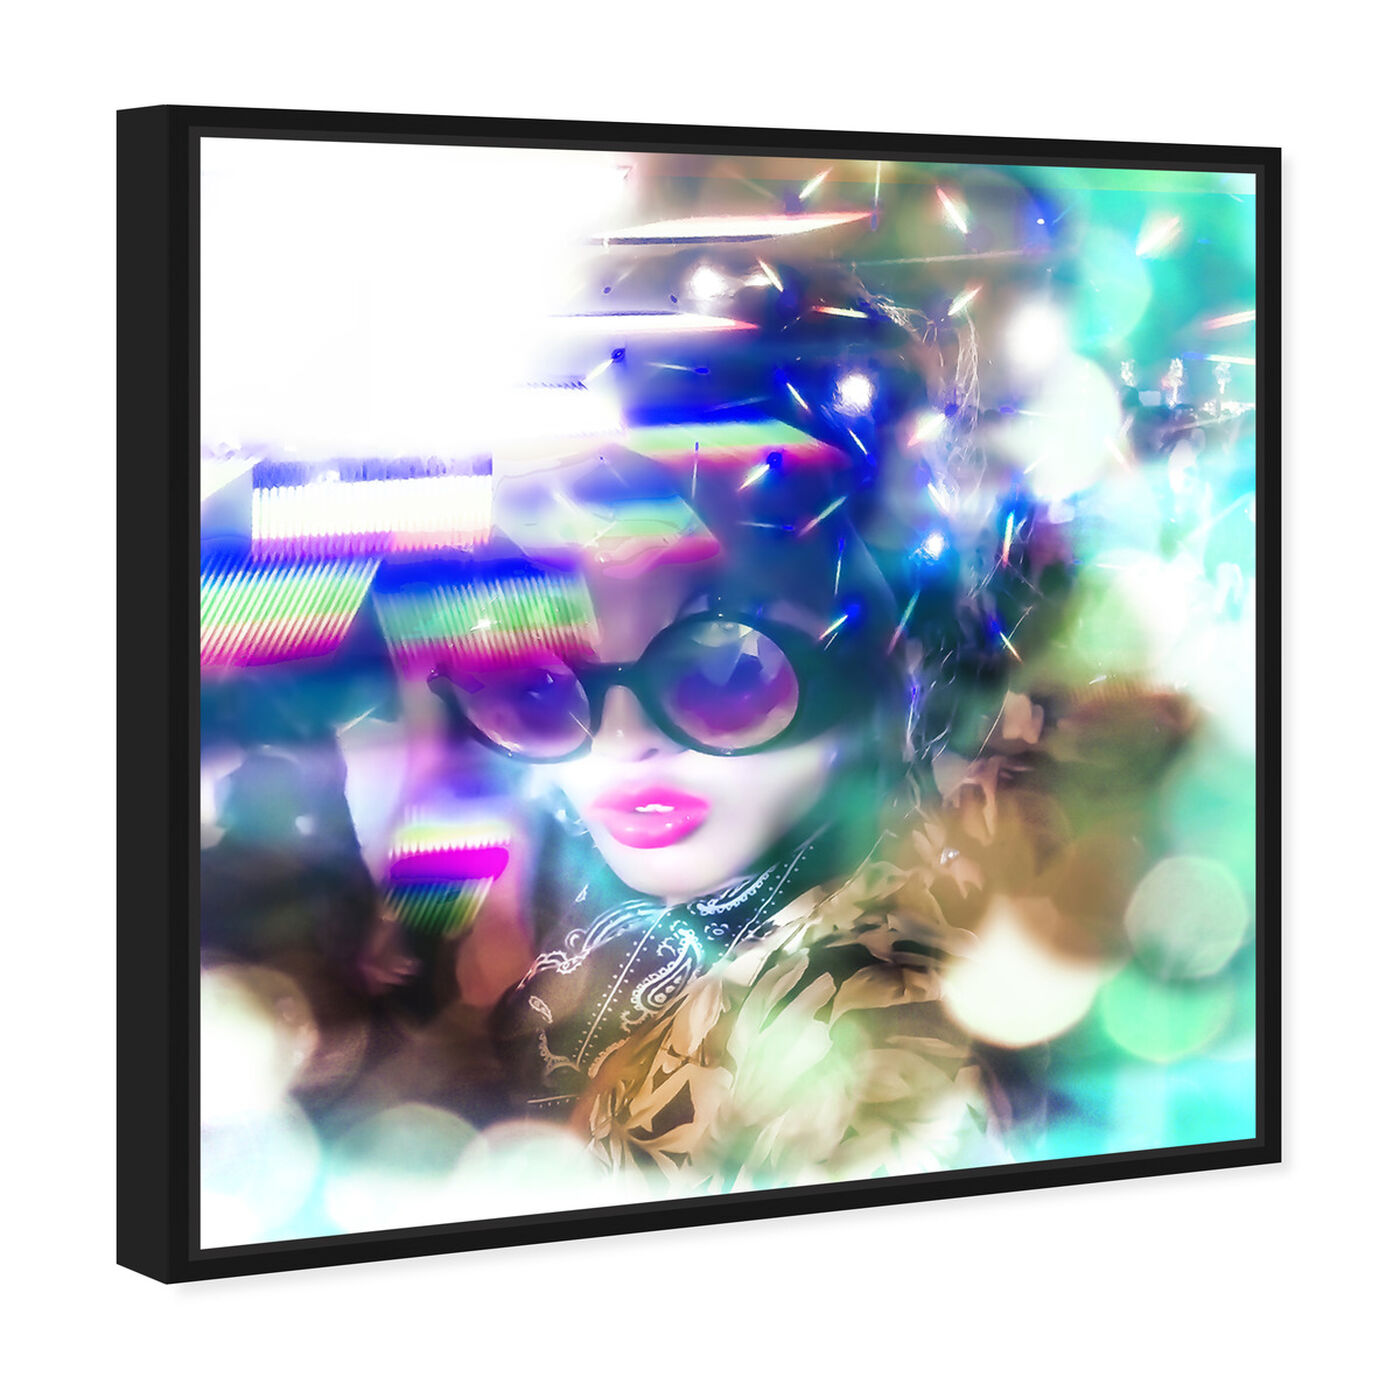 Angled view of Curro Cardenal - Neon Rave featuring fashion and glam and portraits art.